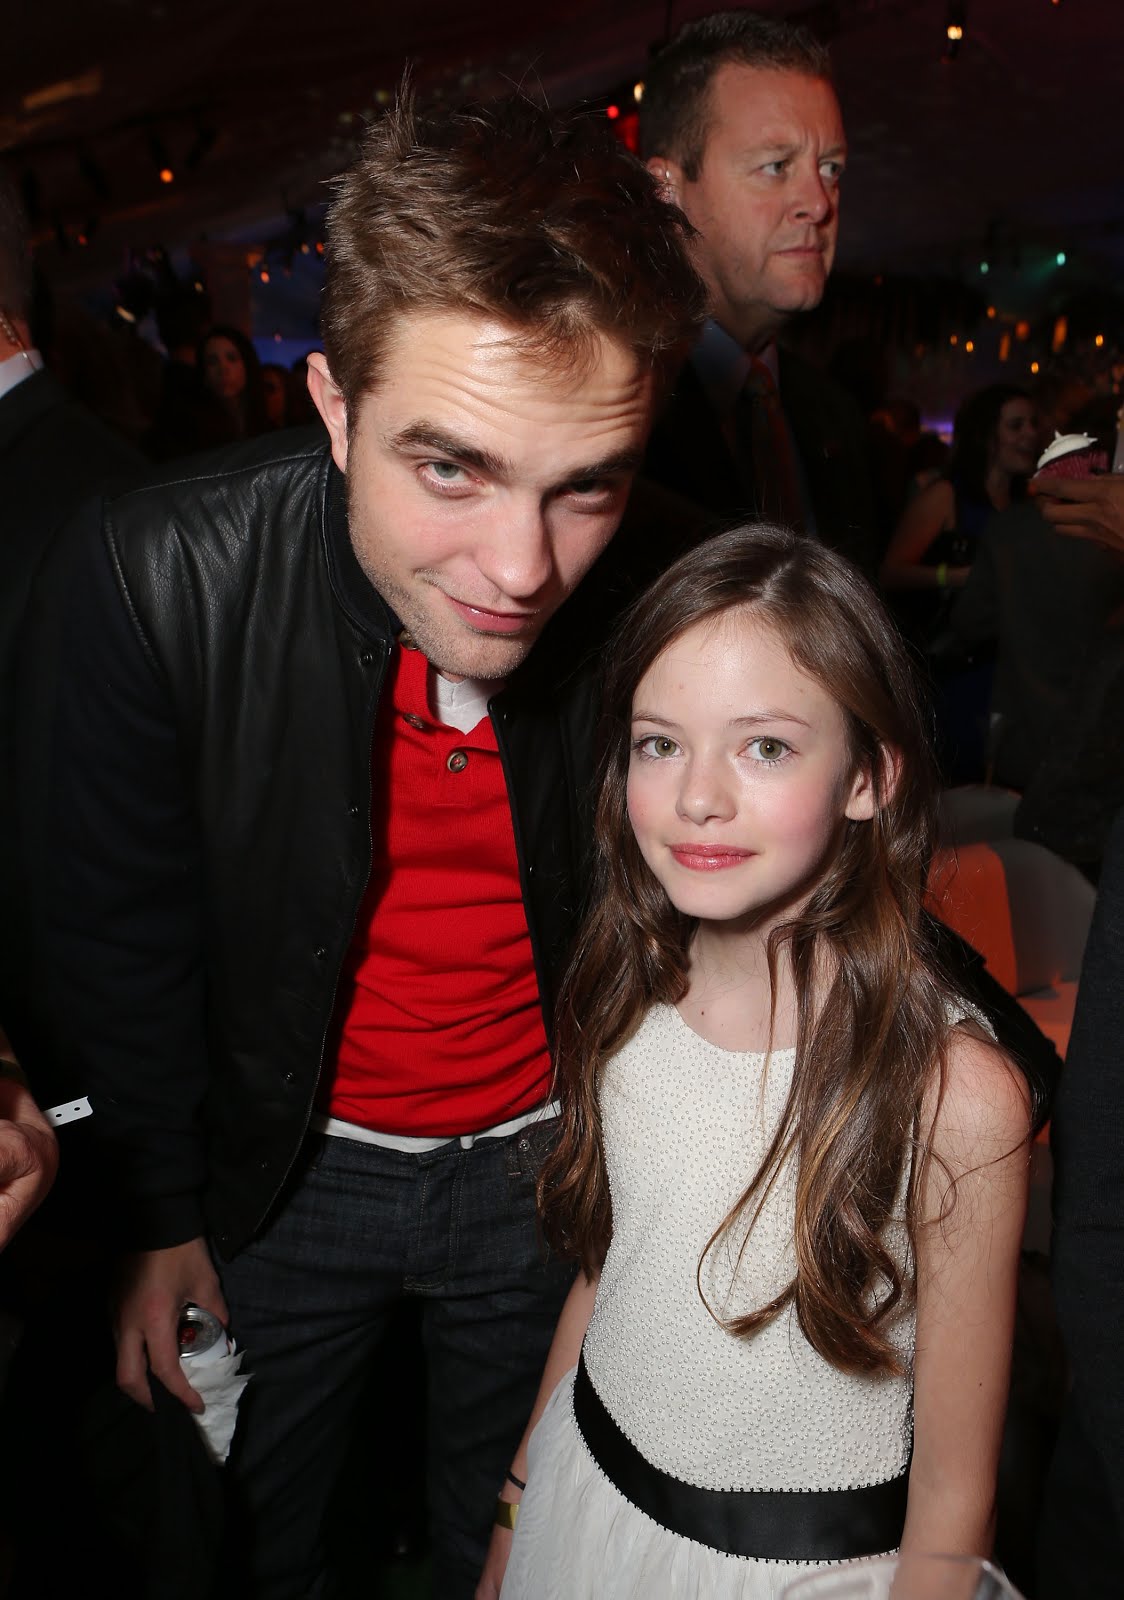 Robert Pattinson Life: Mackenzie Foy Talks About Rob and Kristen with USA Today